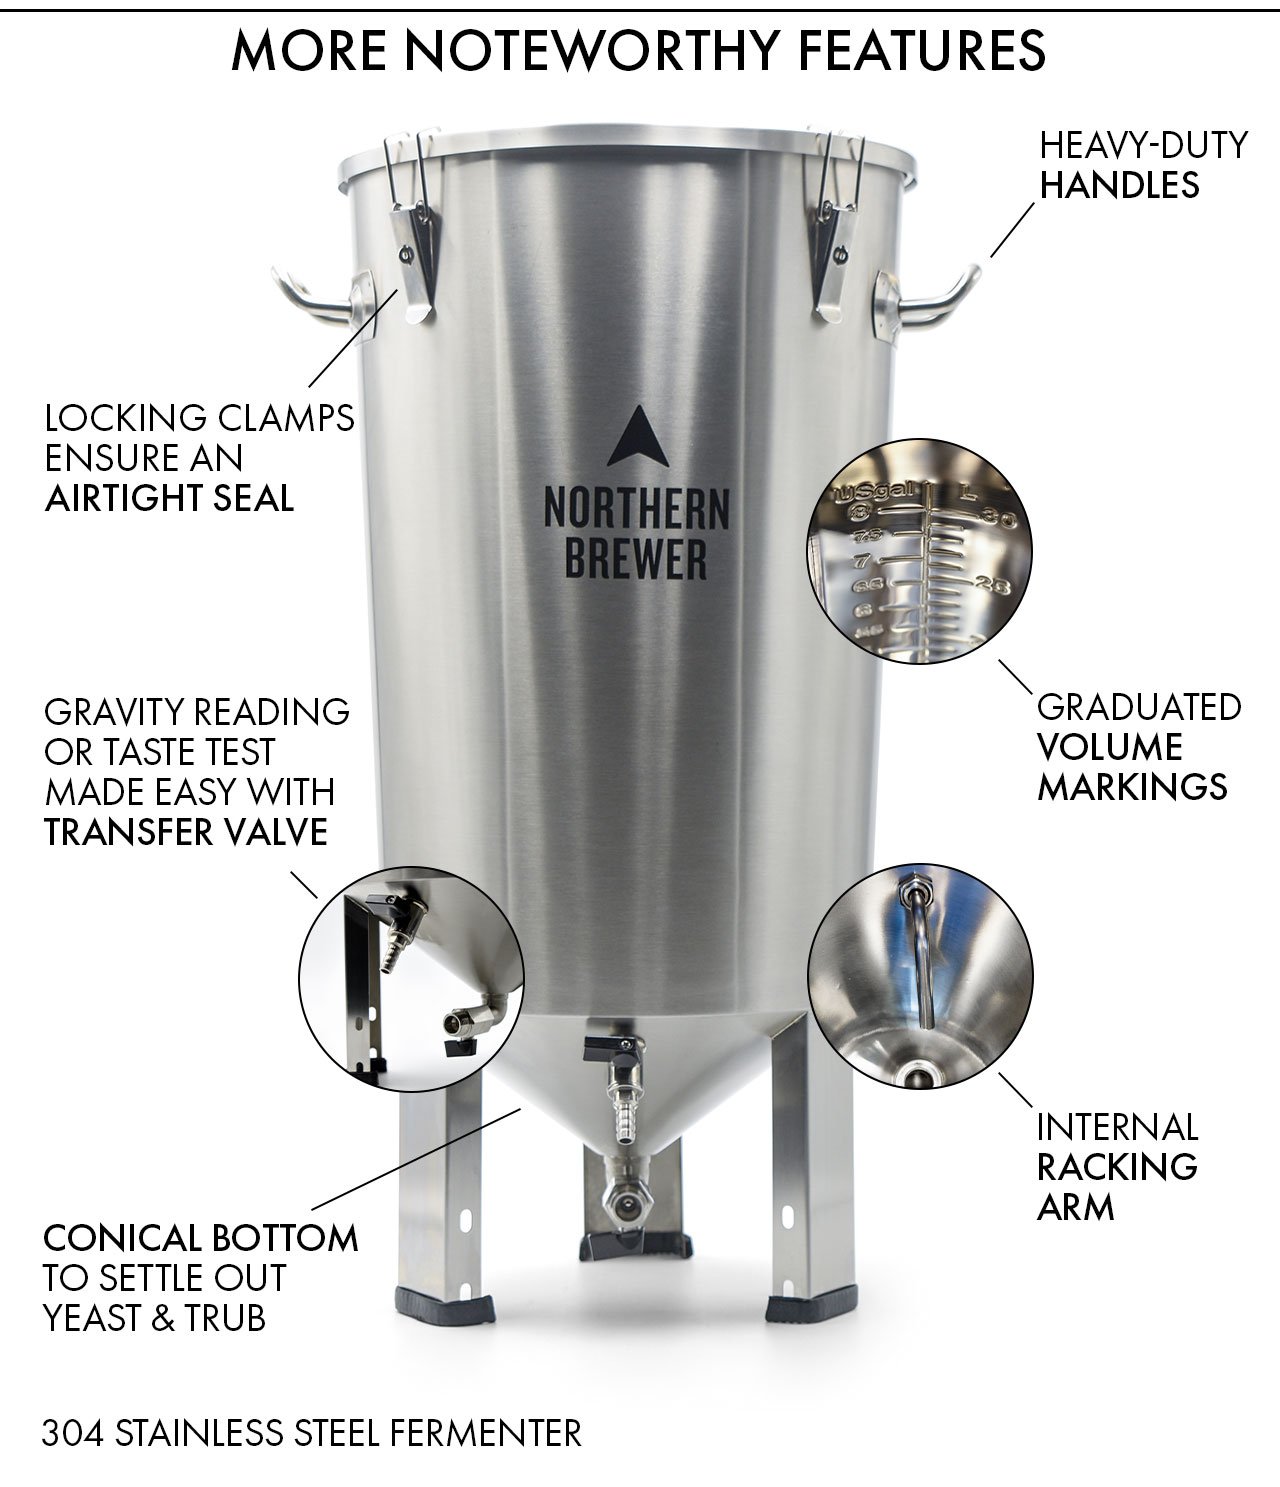 Reactor Conical Fermenter Noteworthy Features, including 304 Stainless Steel